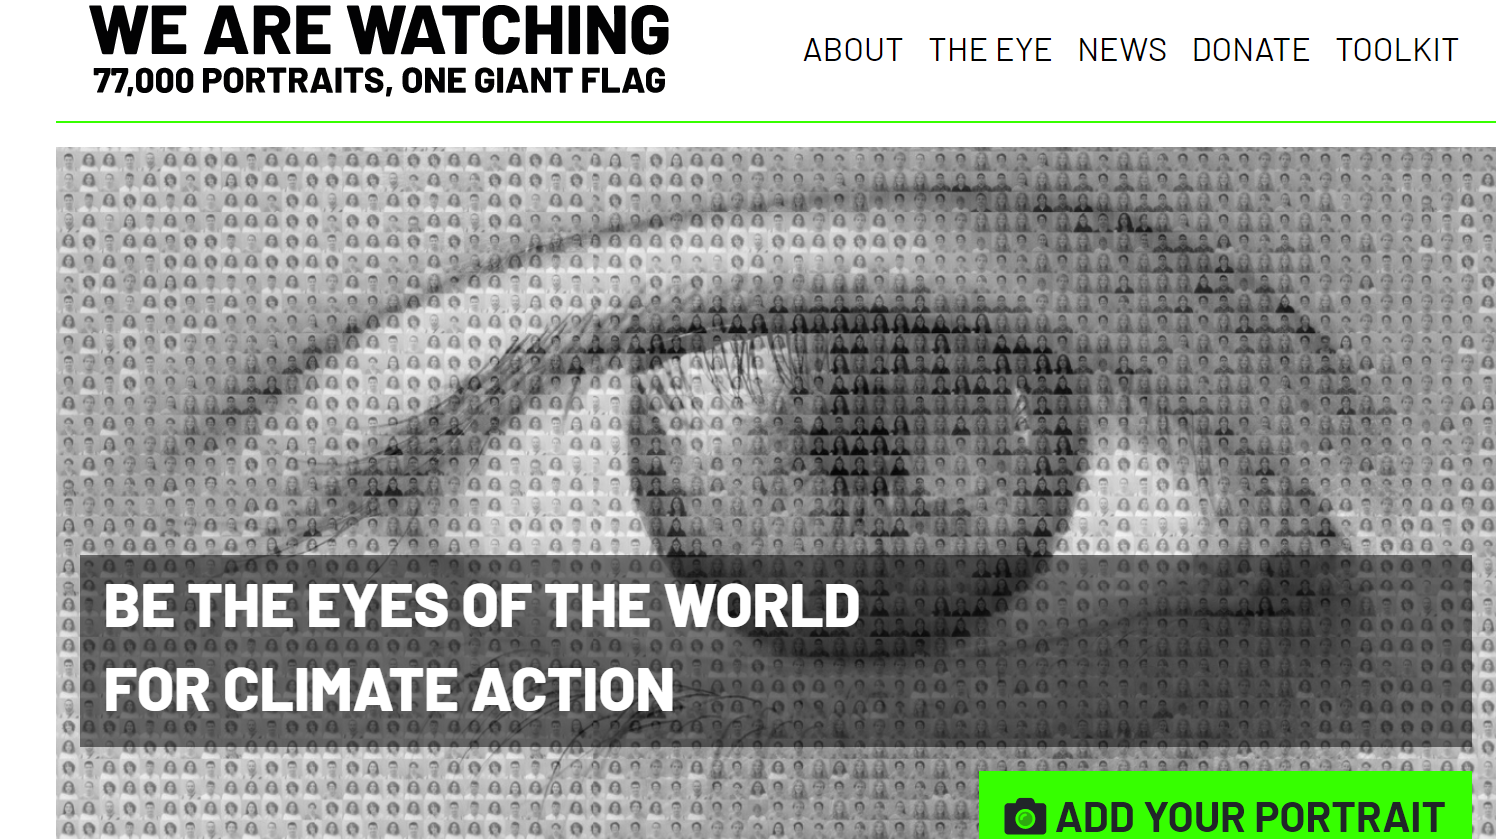 home page du site wearewatching.org [wearewatching.org]